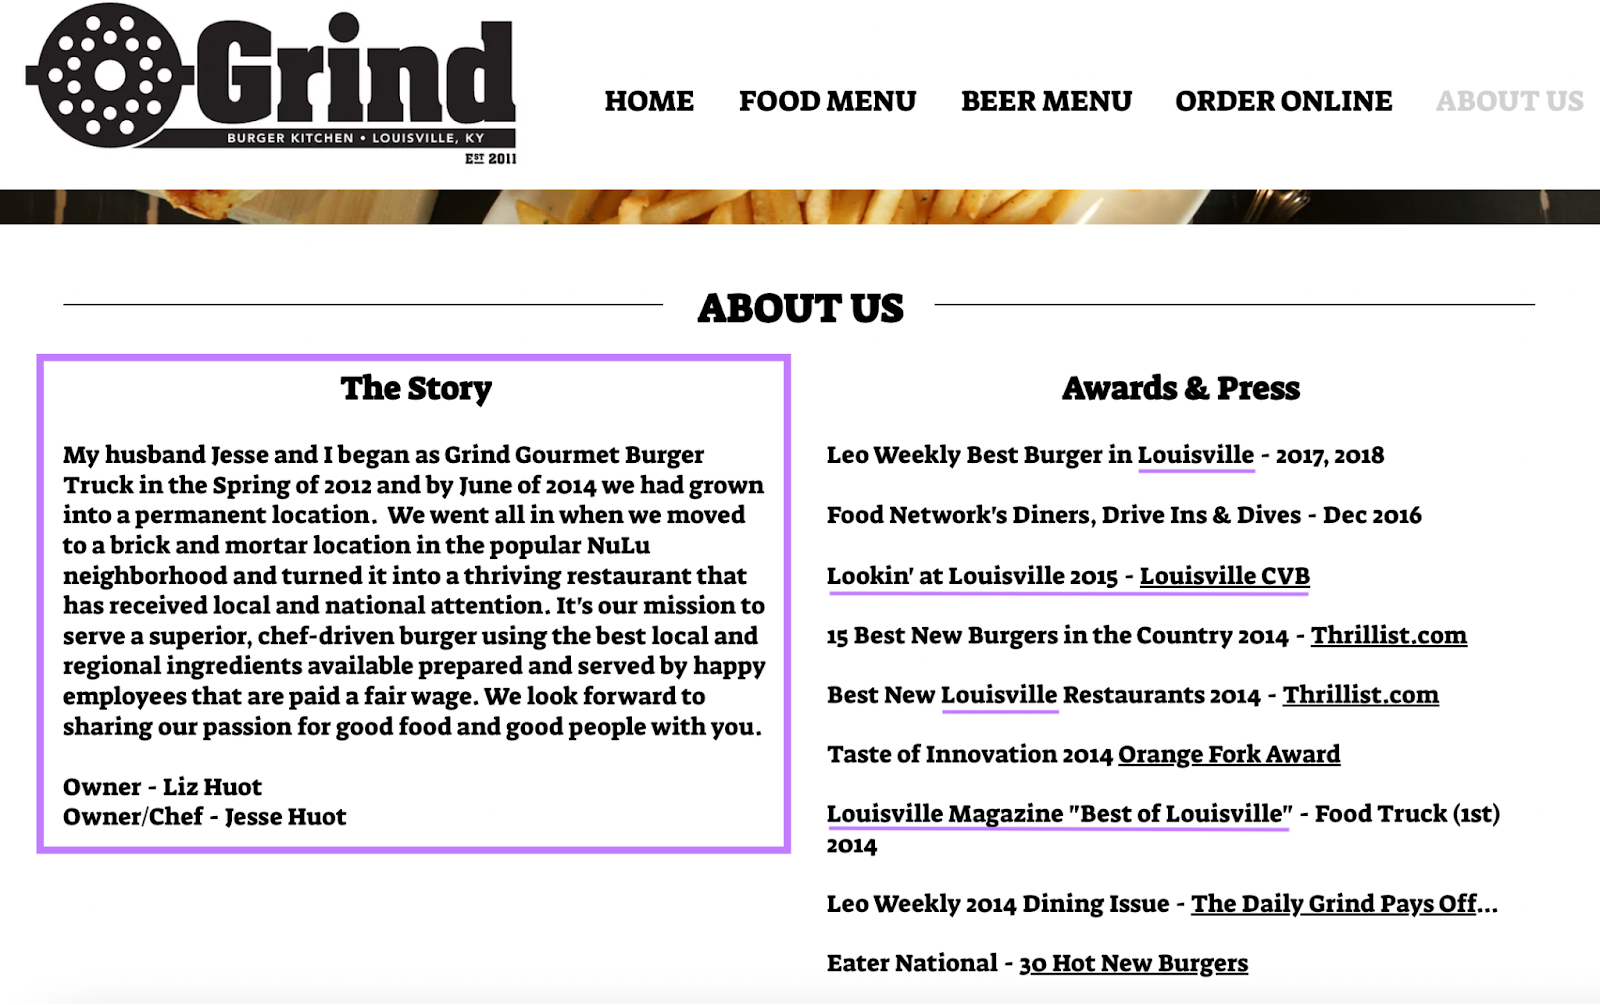 Grind's "About us" landing page